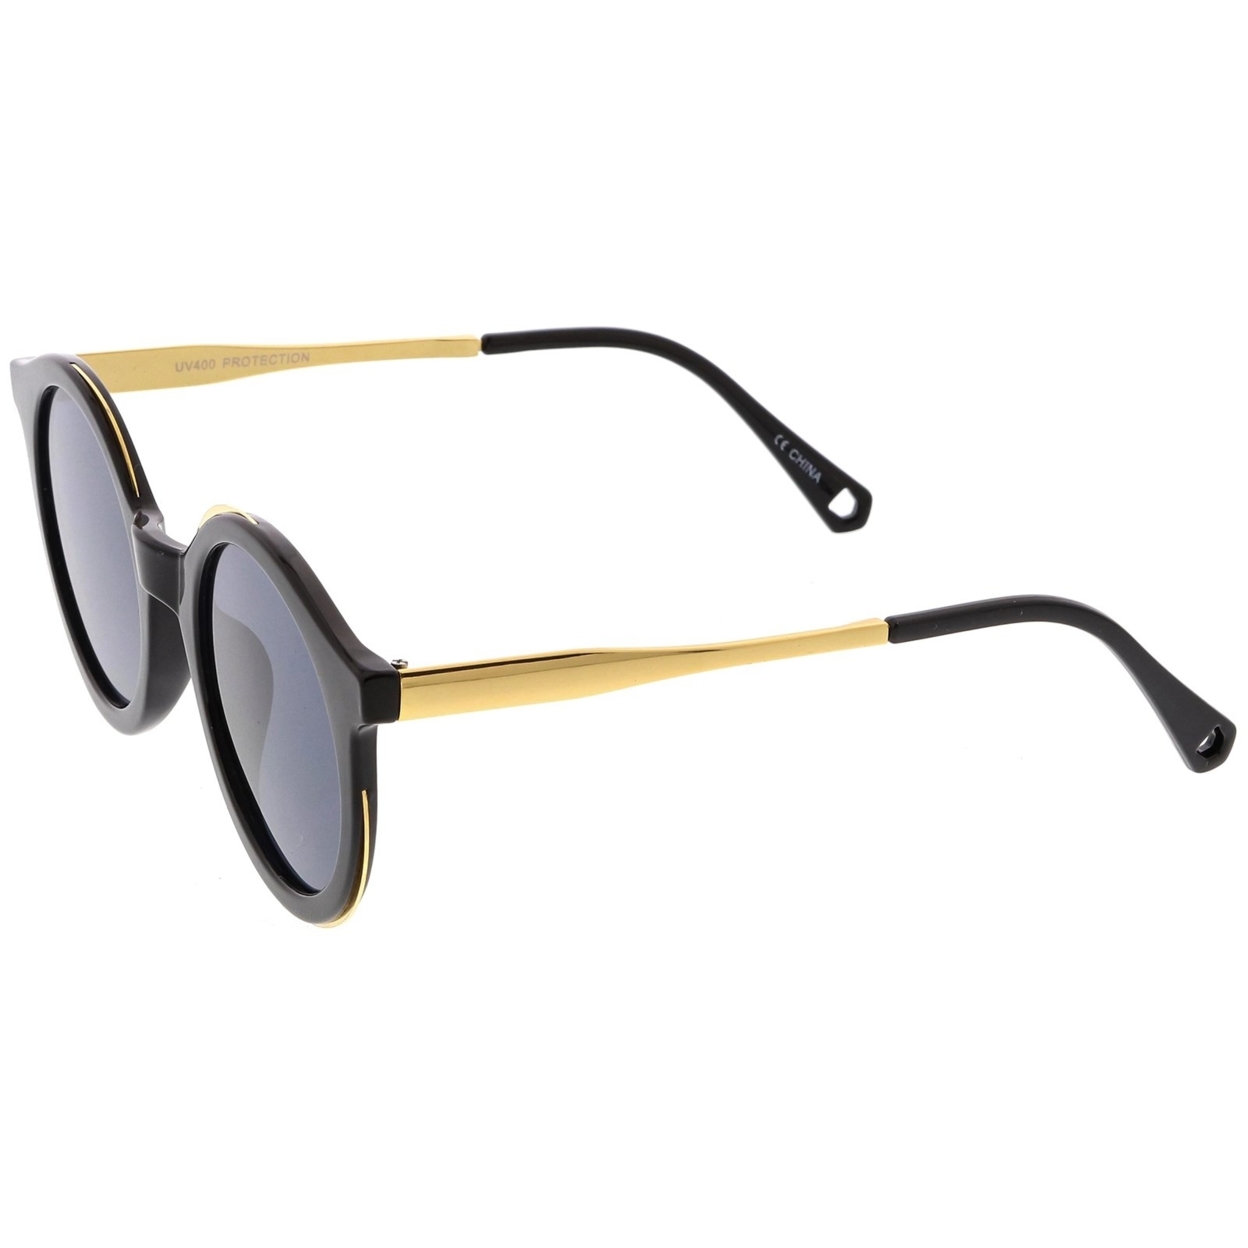 Modern Horn Rimmed Round Sunglasses With Metal Trim Round Flat Lens 51mm - Black Gold / Smoke